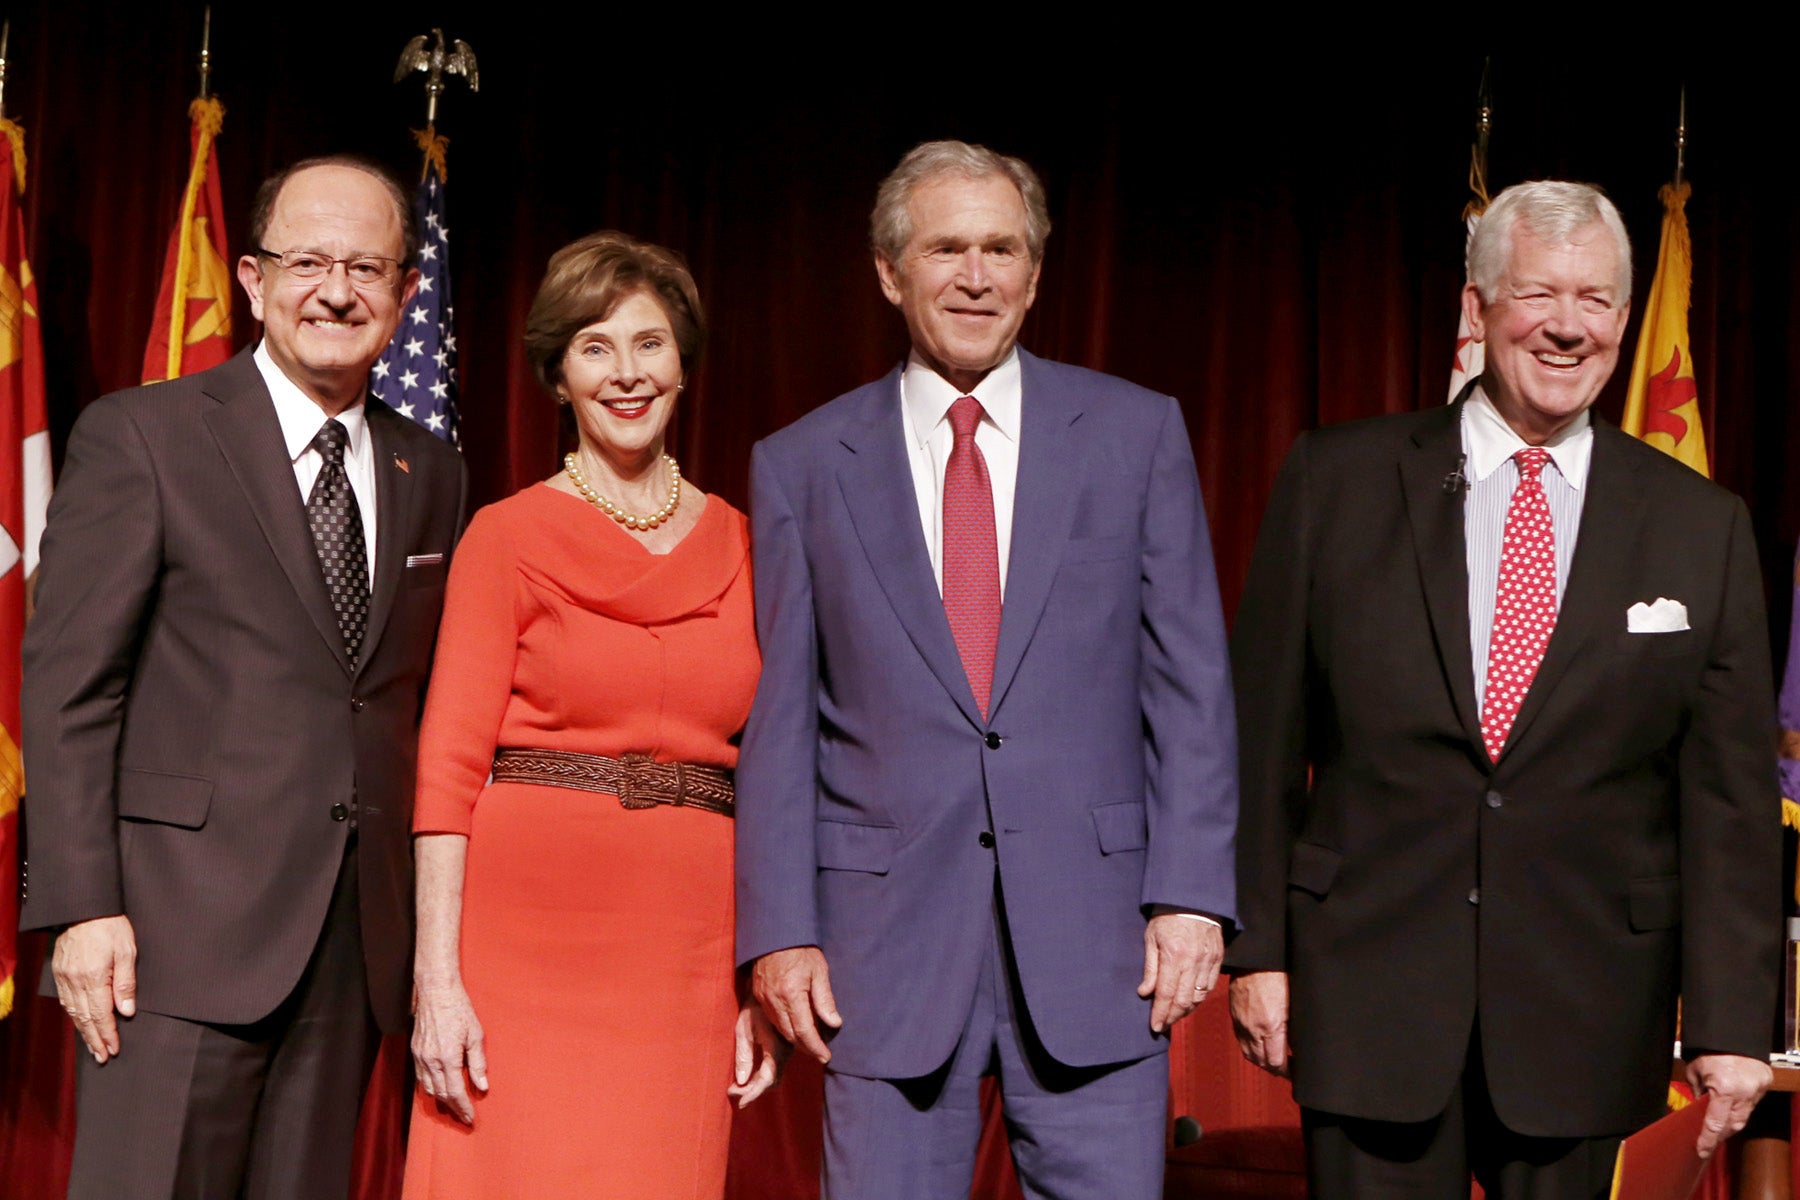 George and Laura bush posing with administration